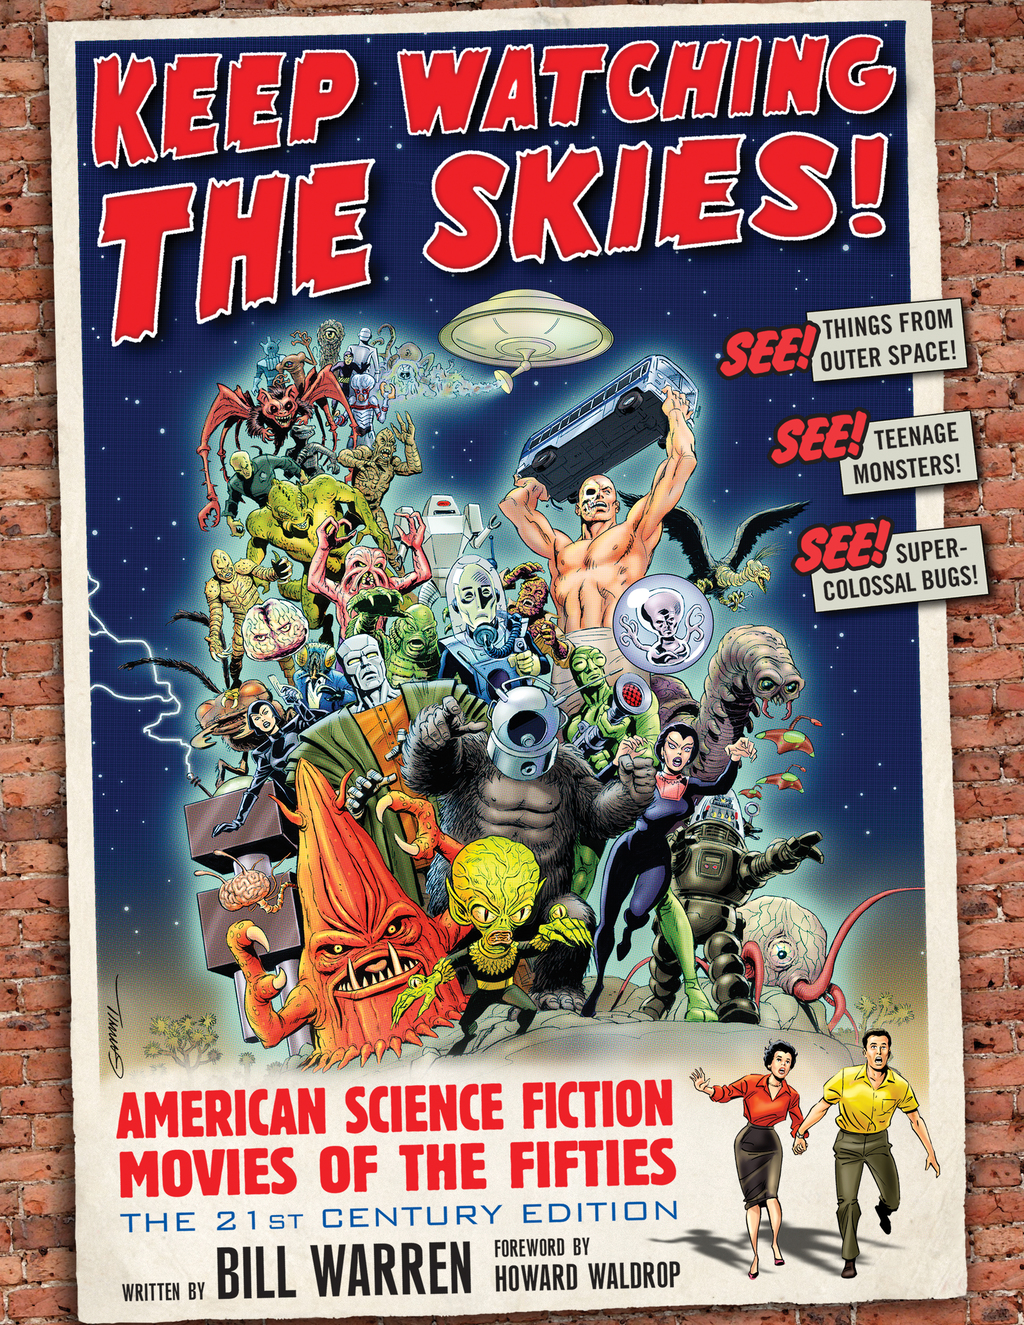 Keep Watching the Skies!: American Science Fiction Movies of the Fifties  The 21st Century Edition (eBook) - Bill Warren,